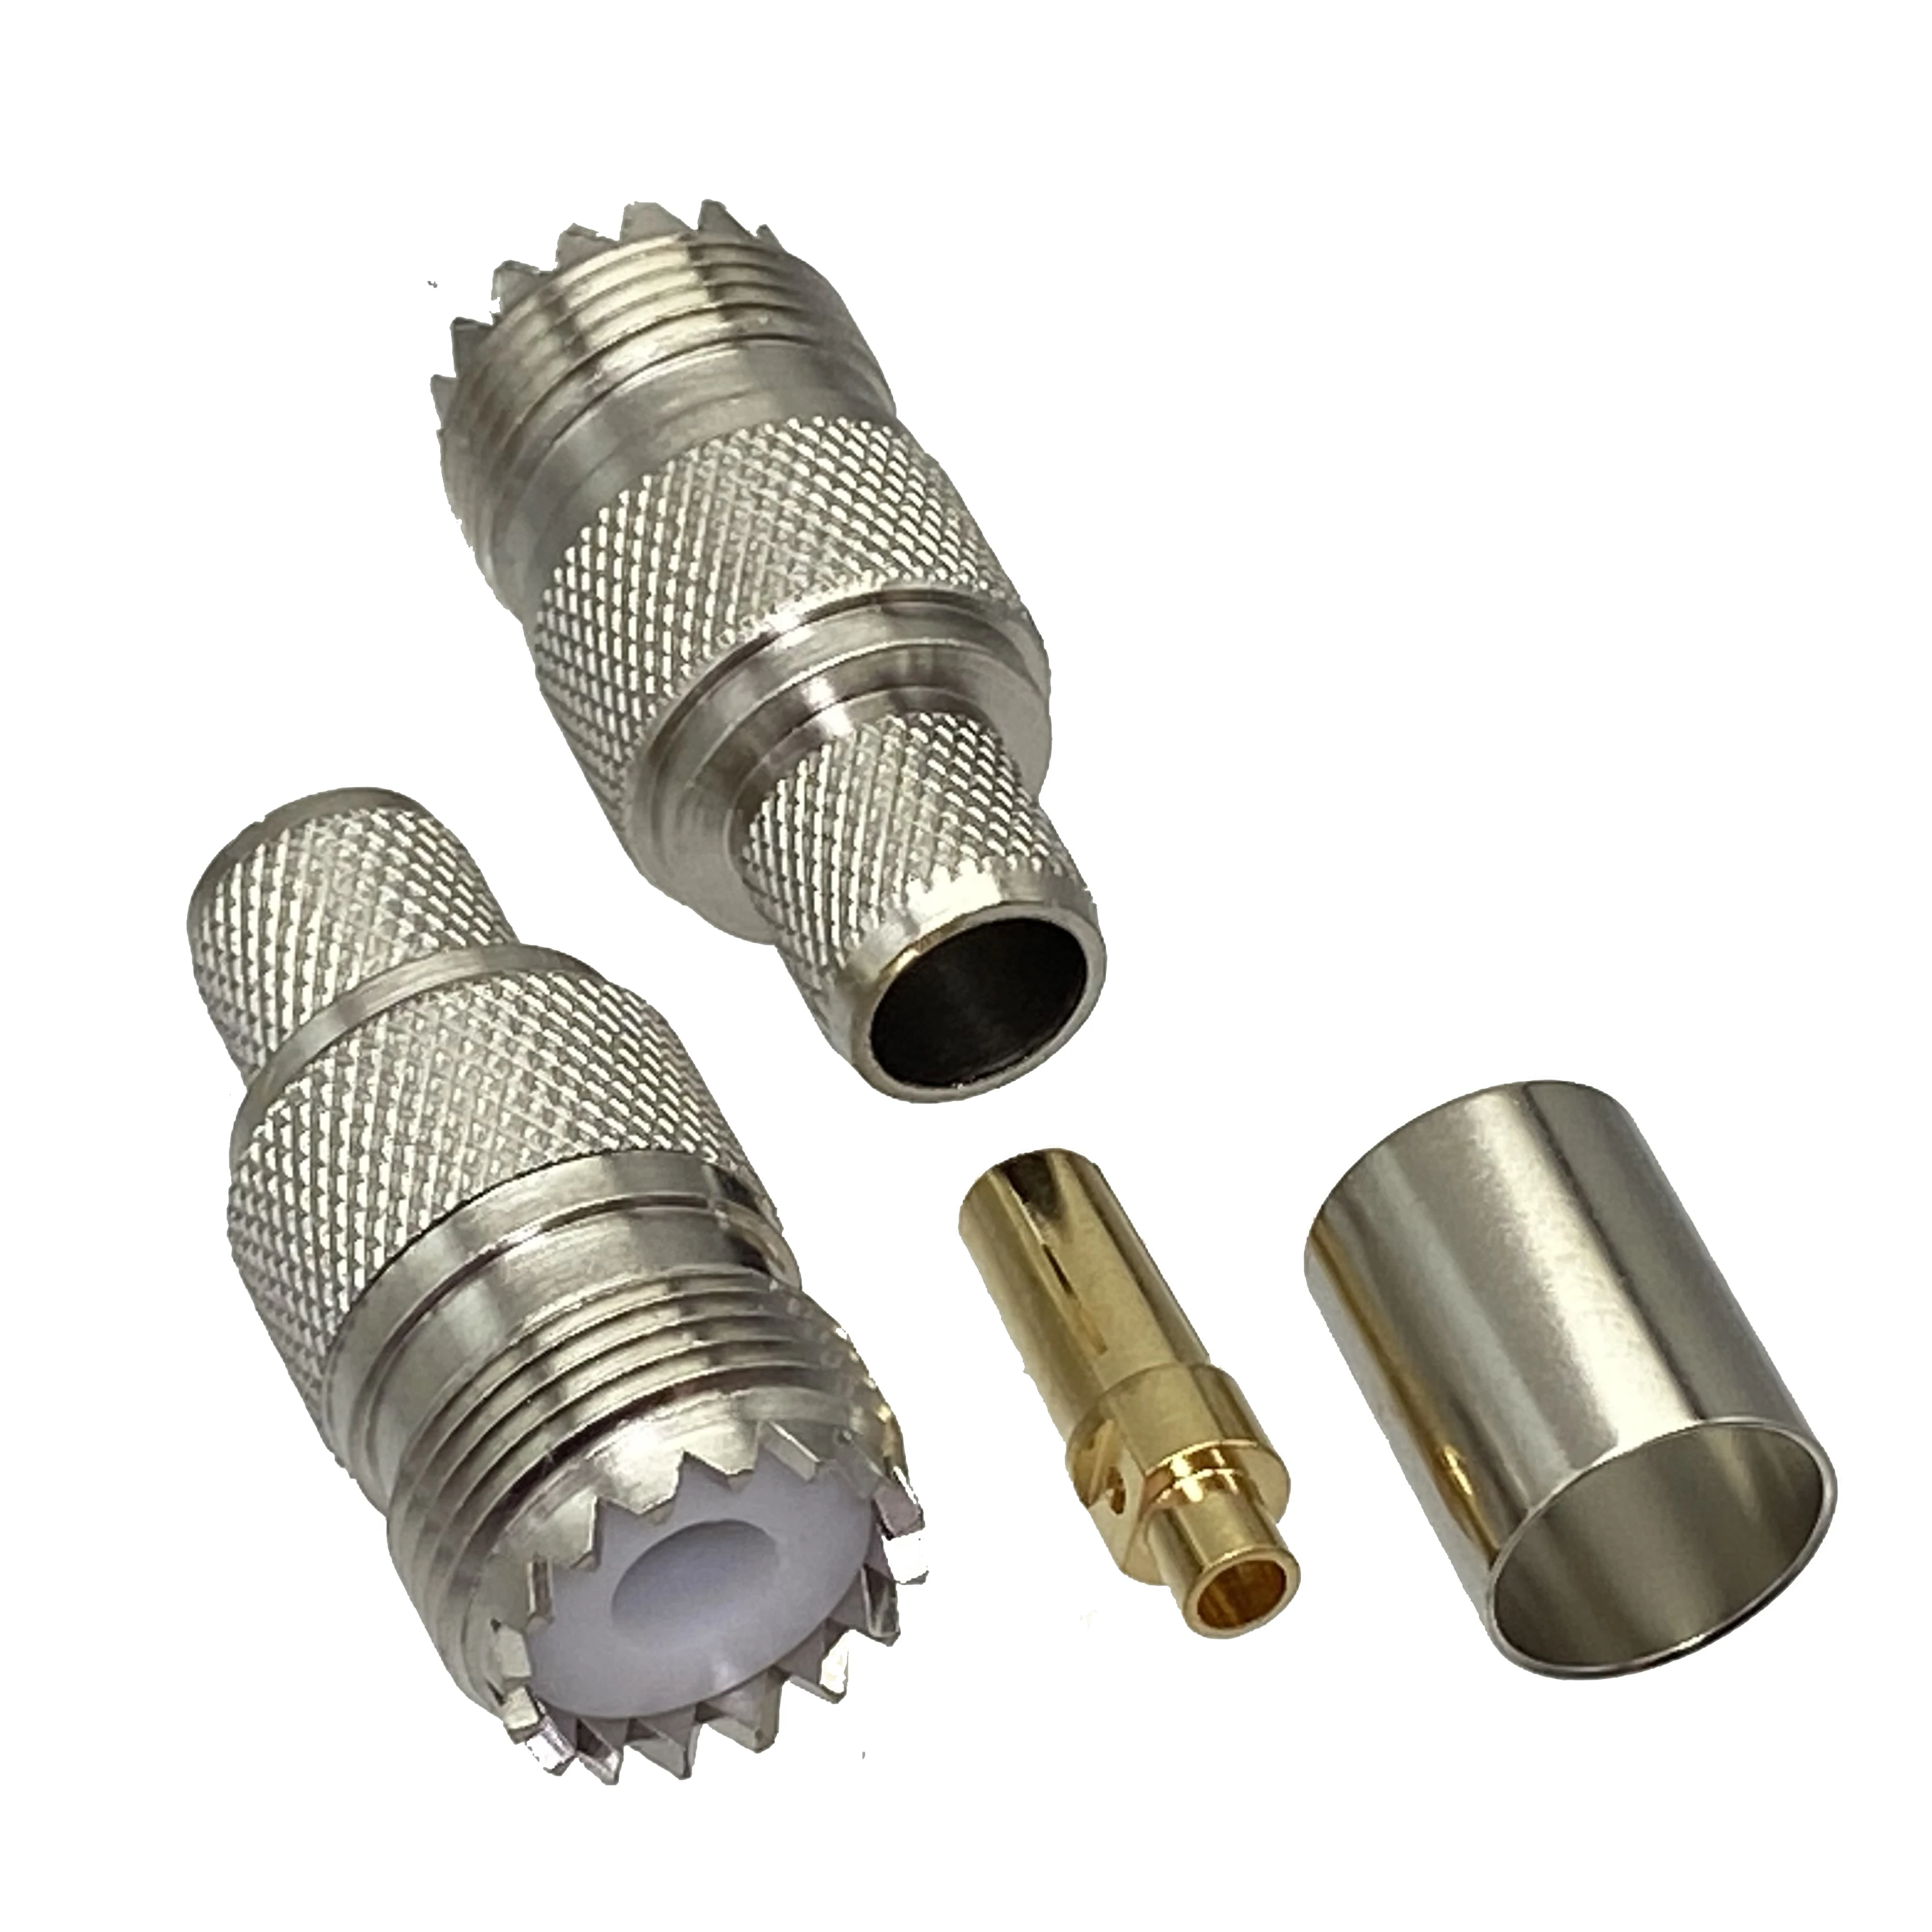 1Pcs Connector UHF female SO239 jack crimp RG8 LMR400 RG213 RG165 cable RF Coaxial Wire Terminals